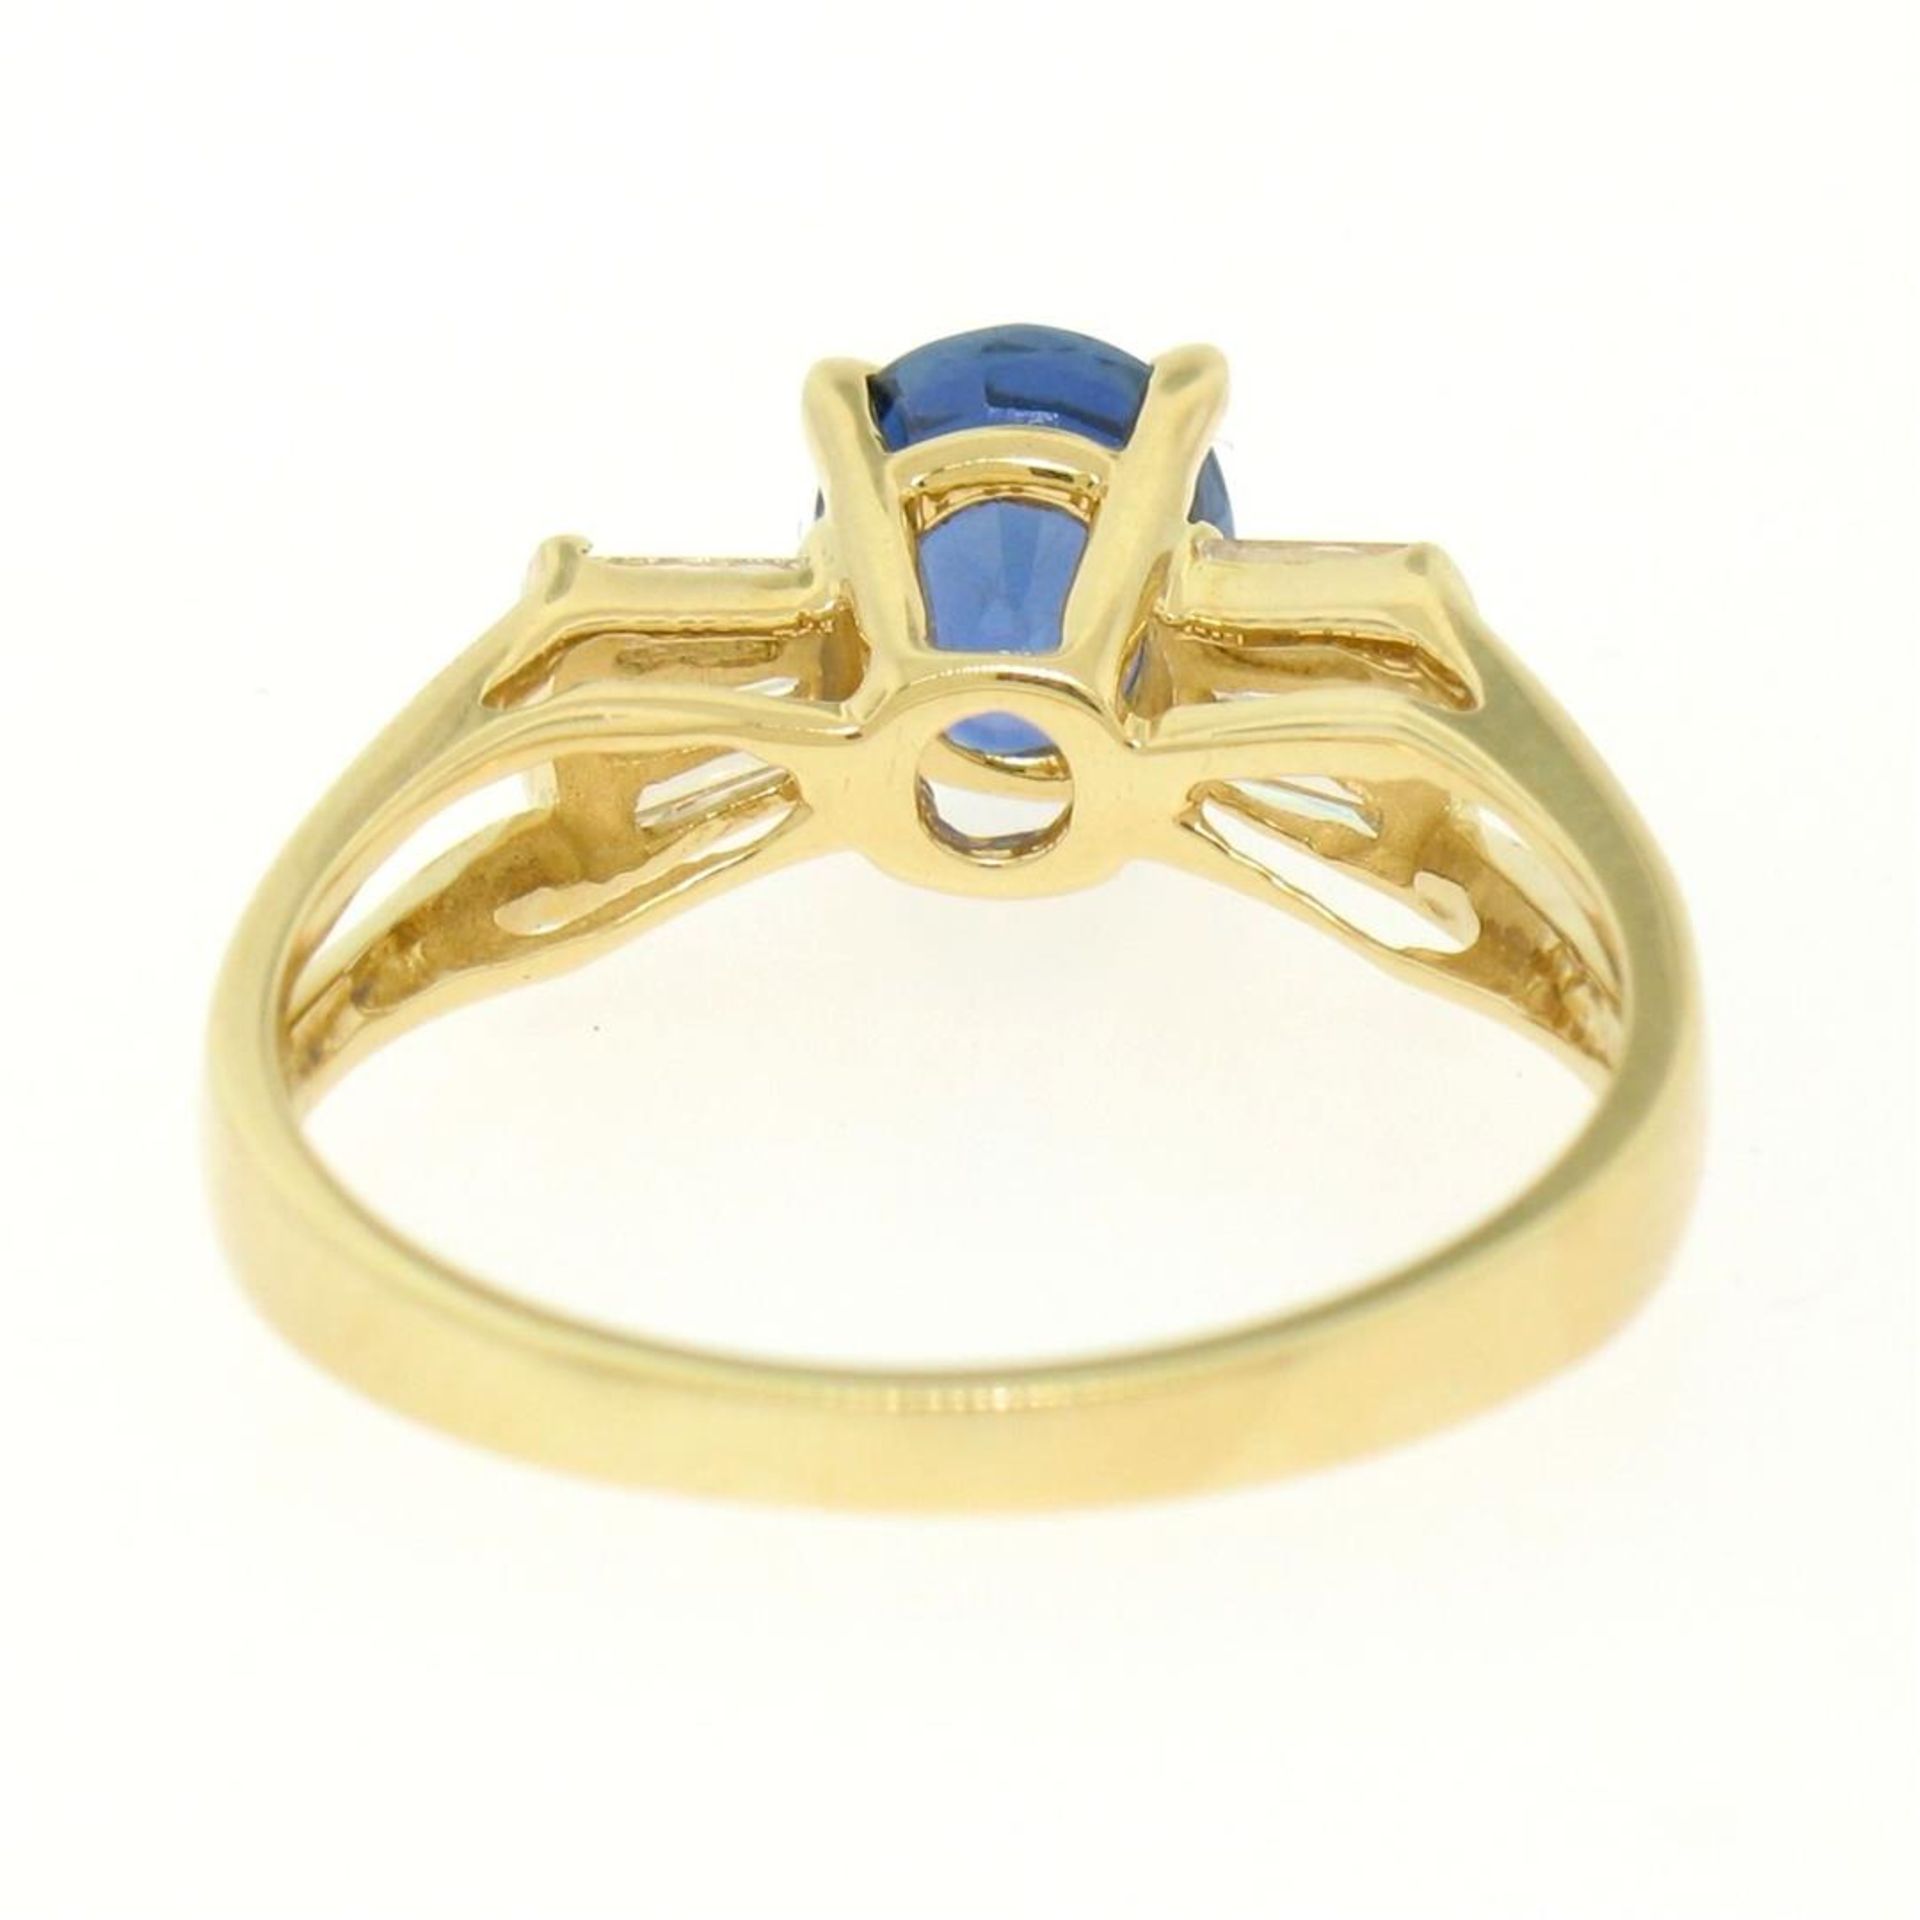 14k Yellow Gold ROYAL BLUE Sapphire Solitaire Ring Fine Baguette Diamond Accents - Image 5 of 9